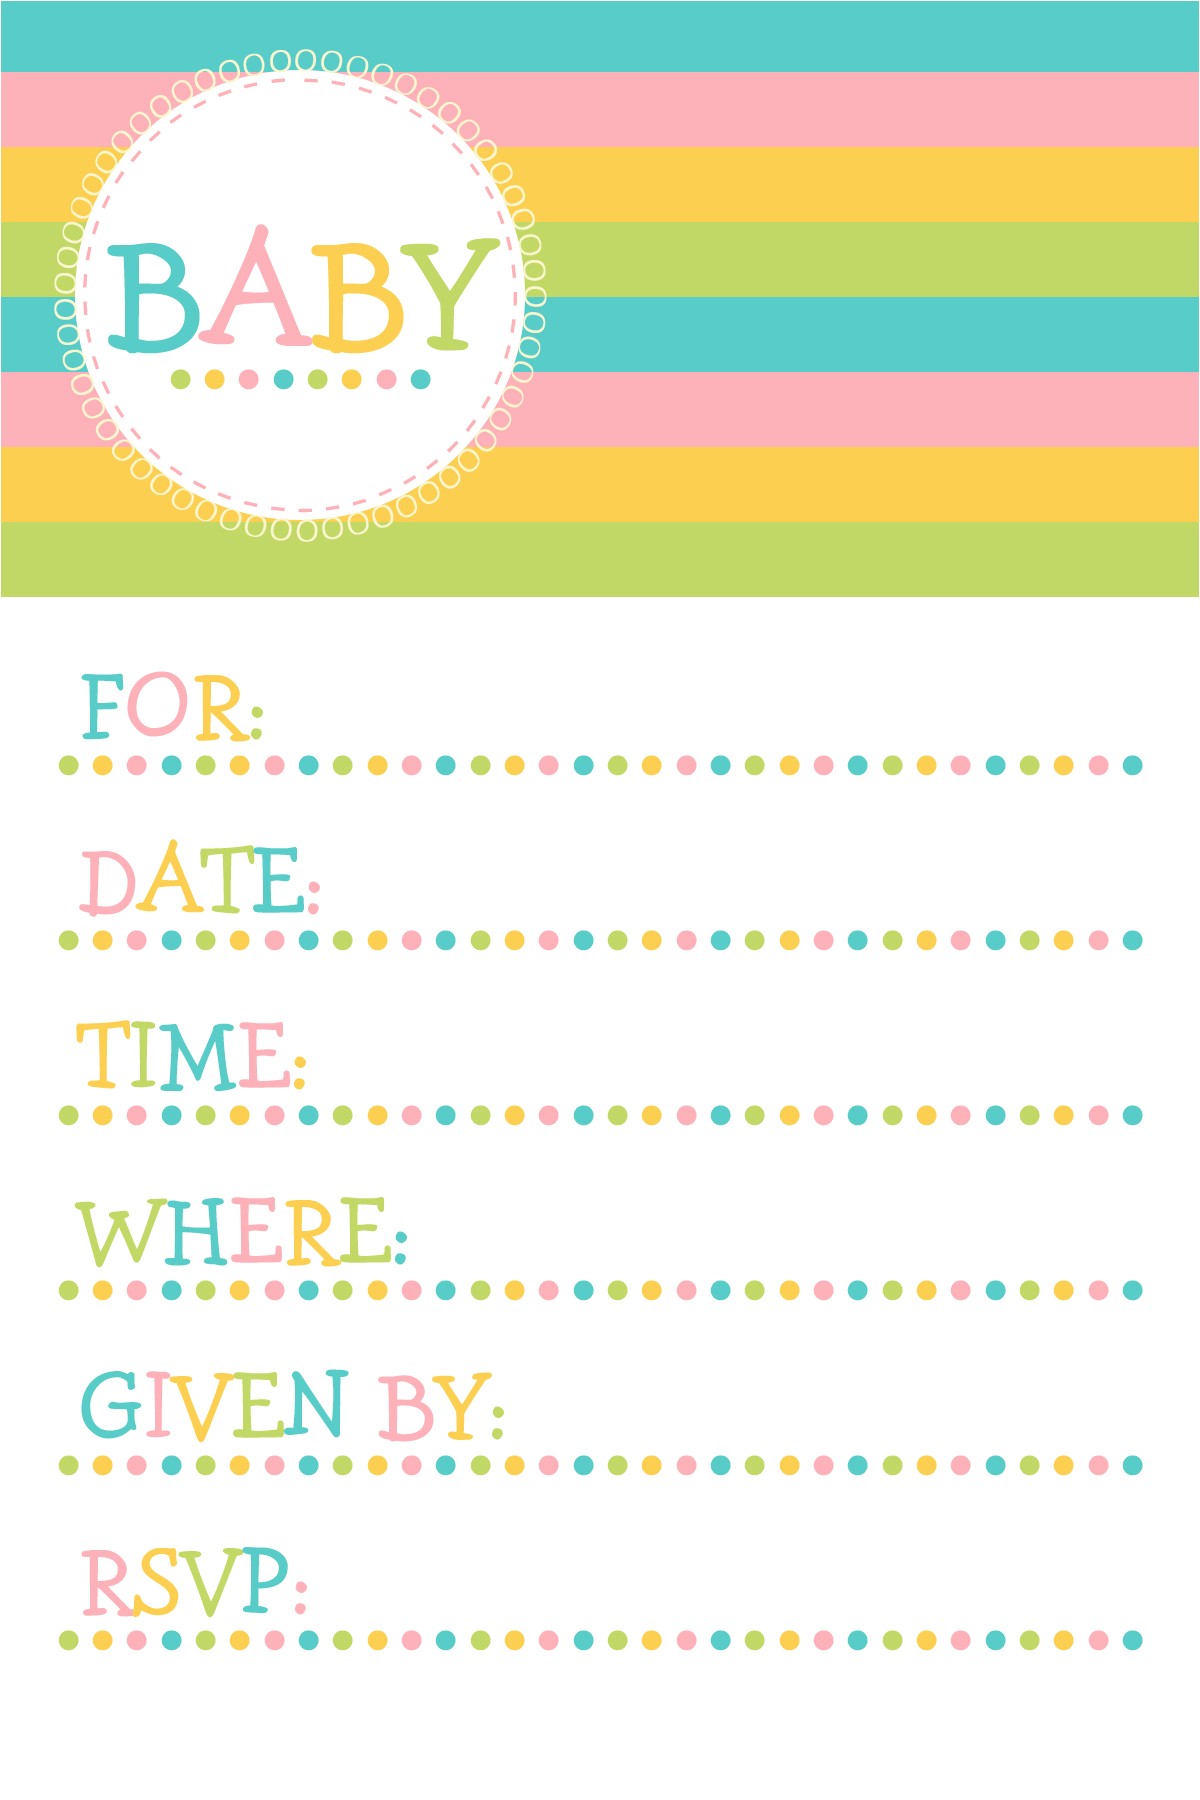 free baby shower invitation template